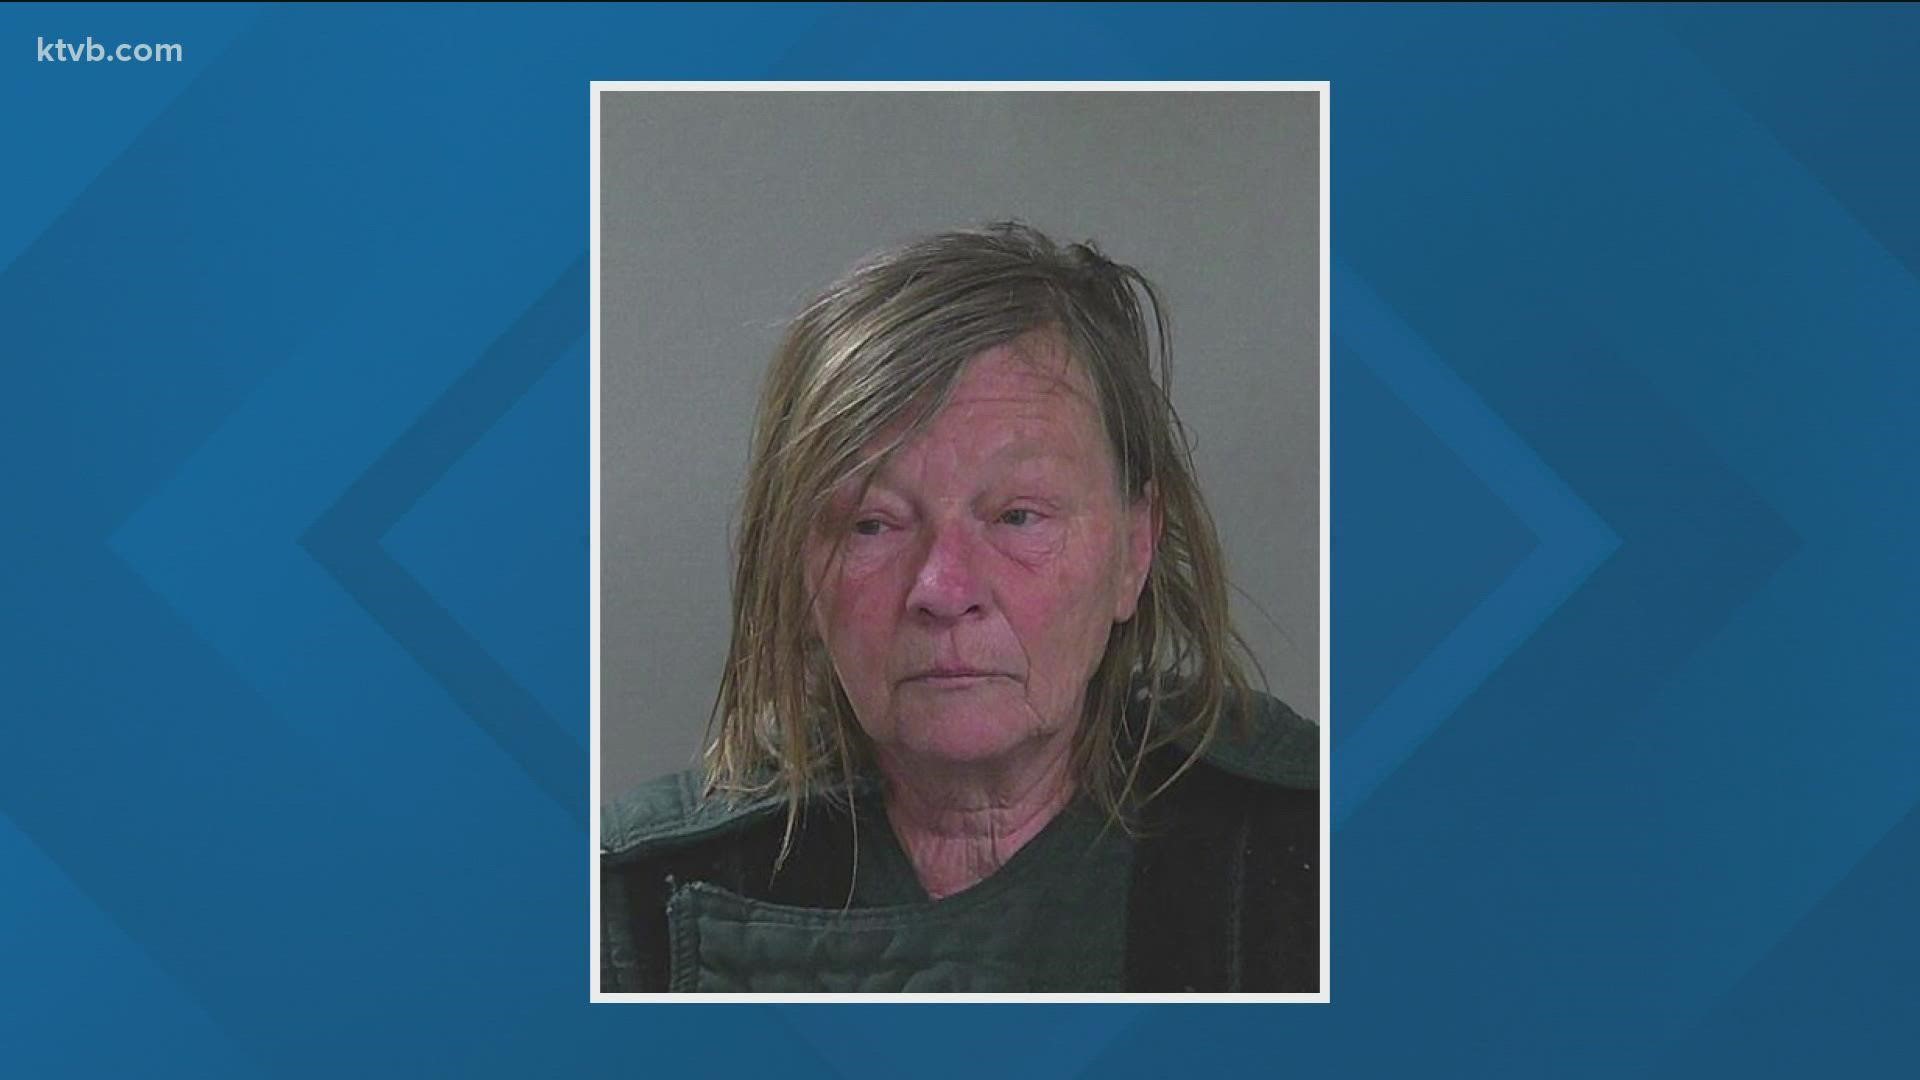 Police said a 65-year-old woman called 911 and confessed to shooting the man in a garage Thursday night.